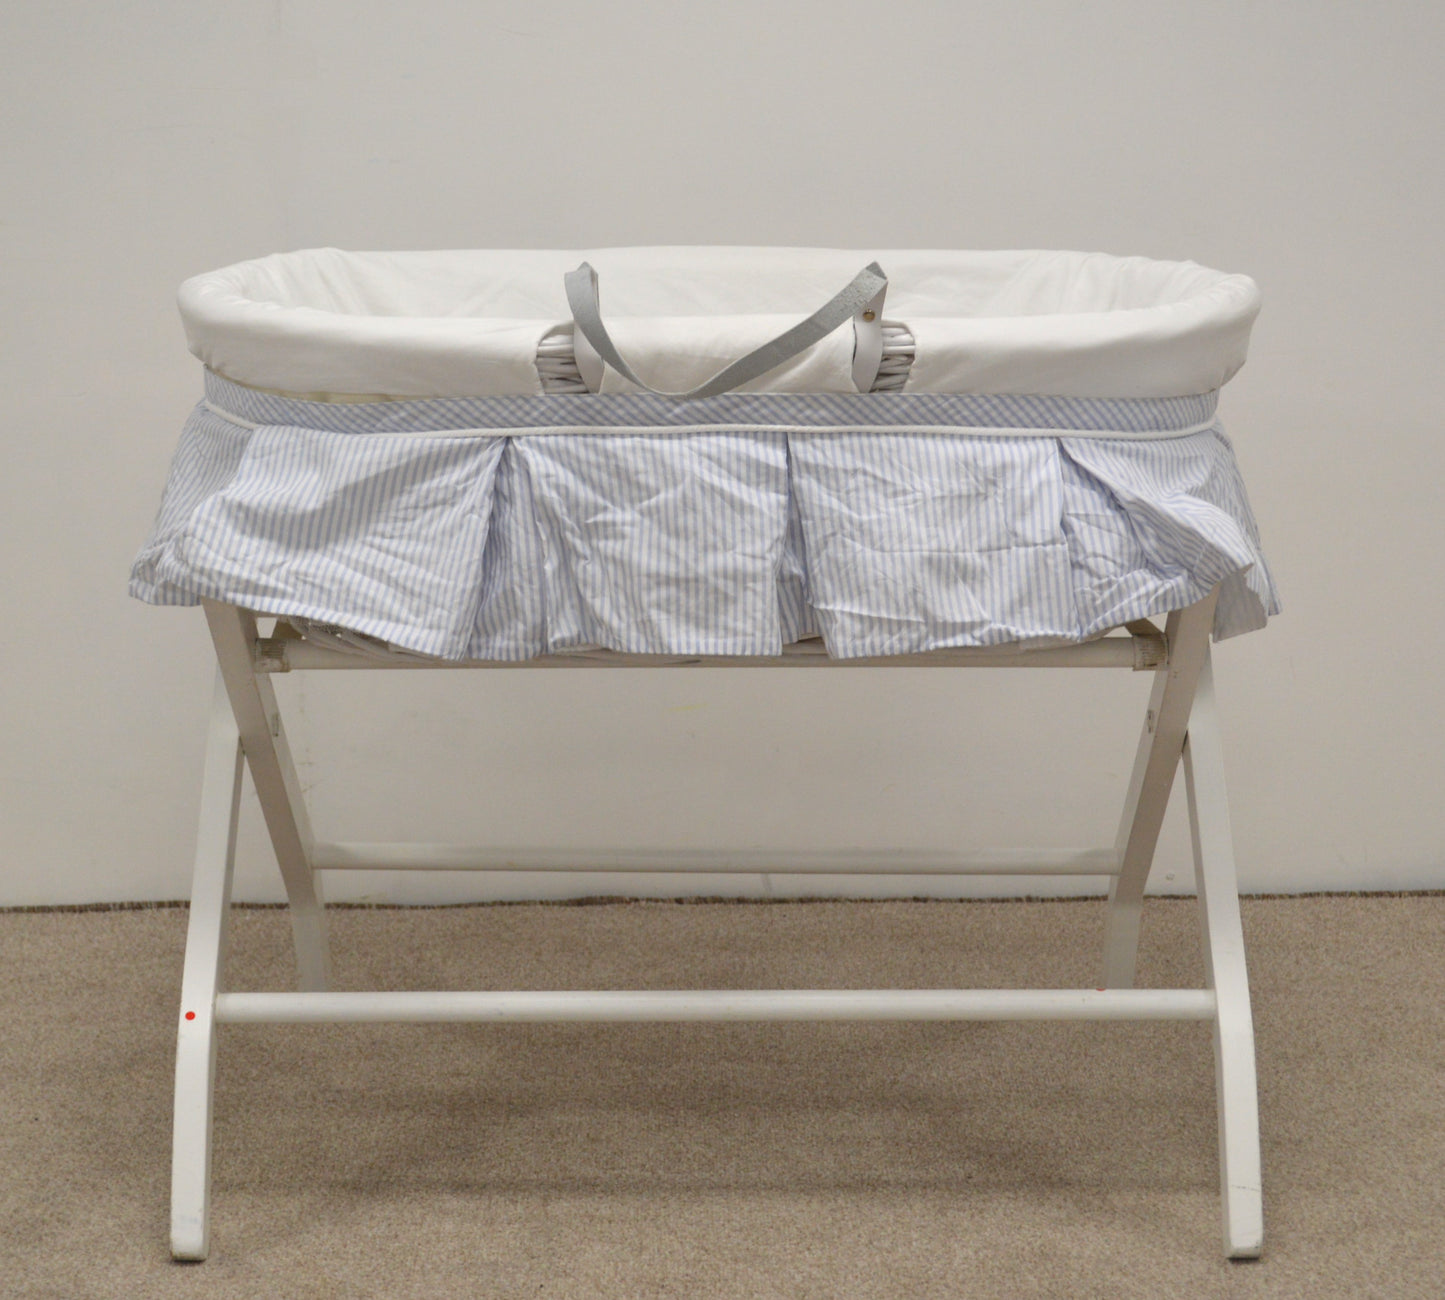 Moses Basket with Blue Trim and White Painted Wooden Frame